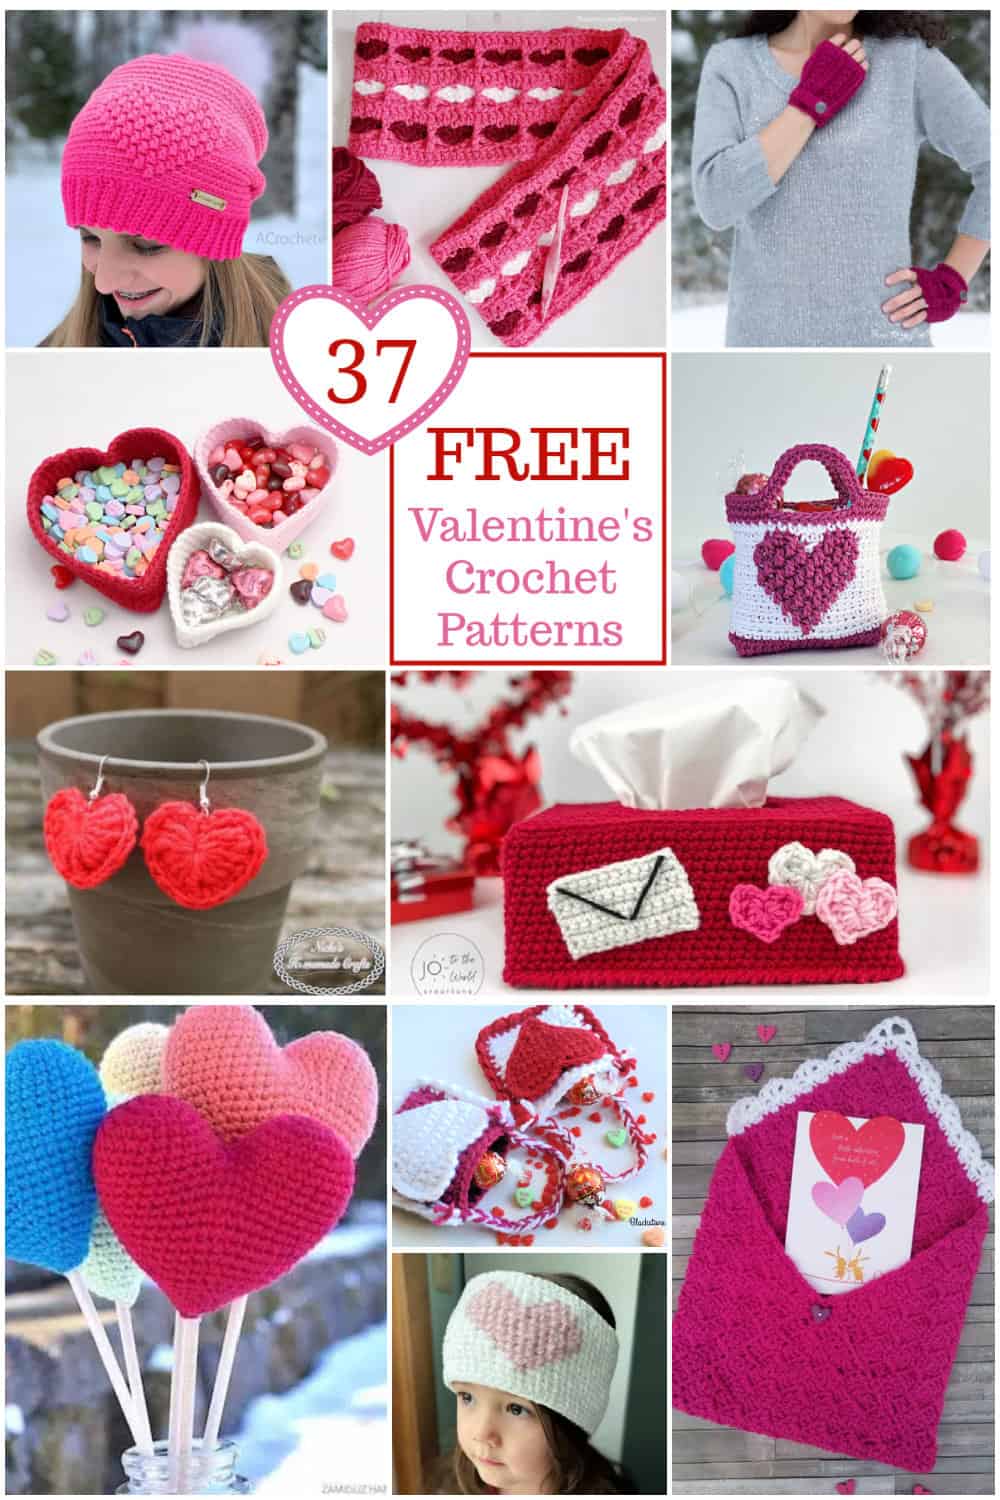 37 Free Valentine's Crochet Patterns - A Crocheted Simplicity